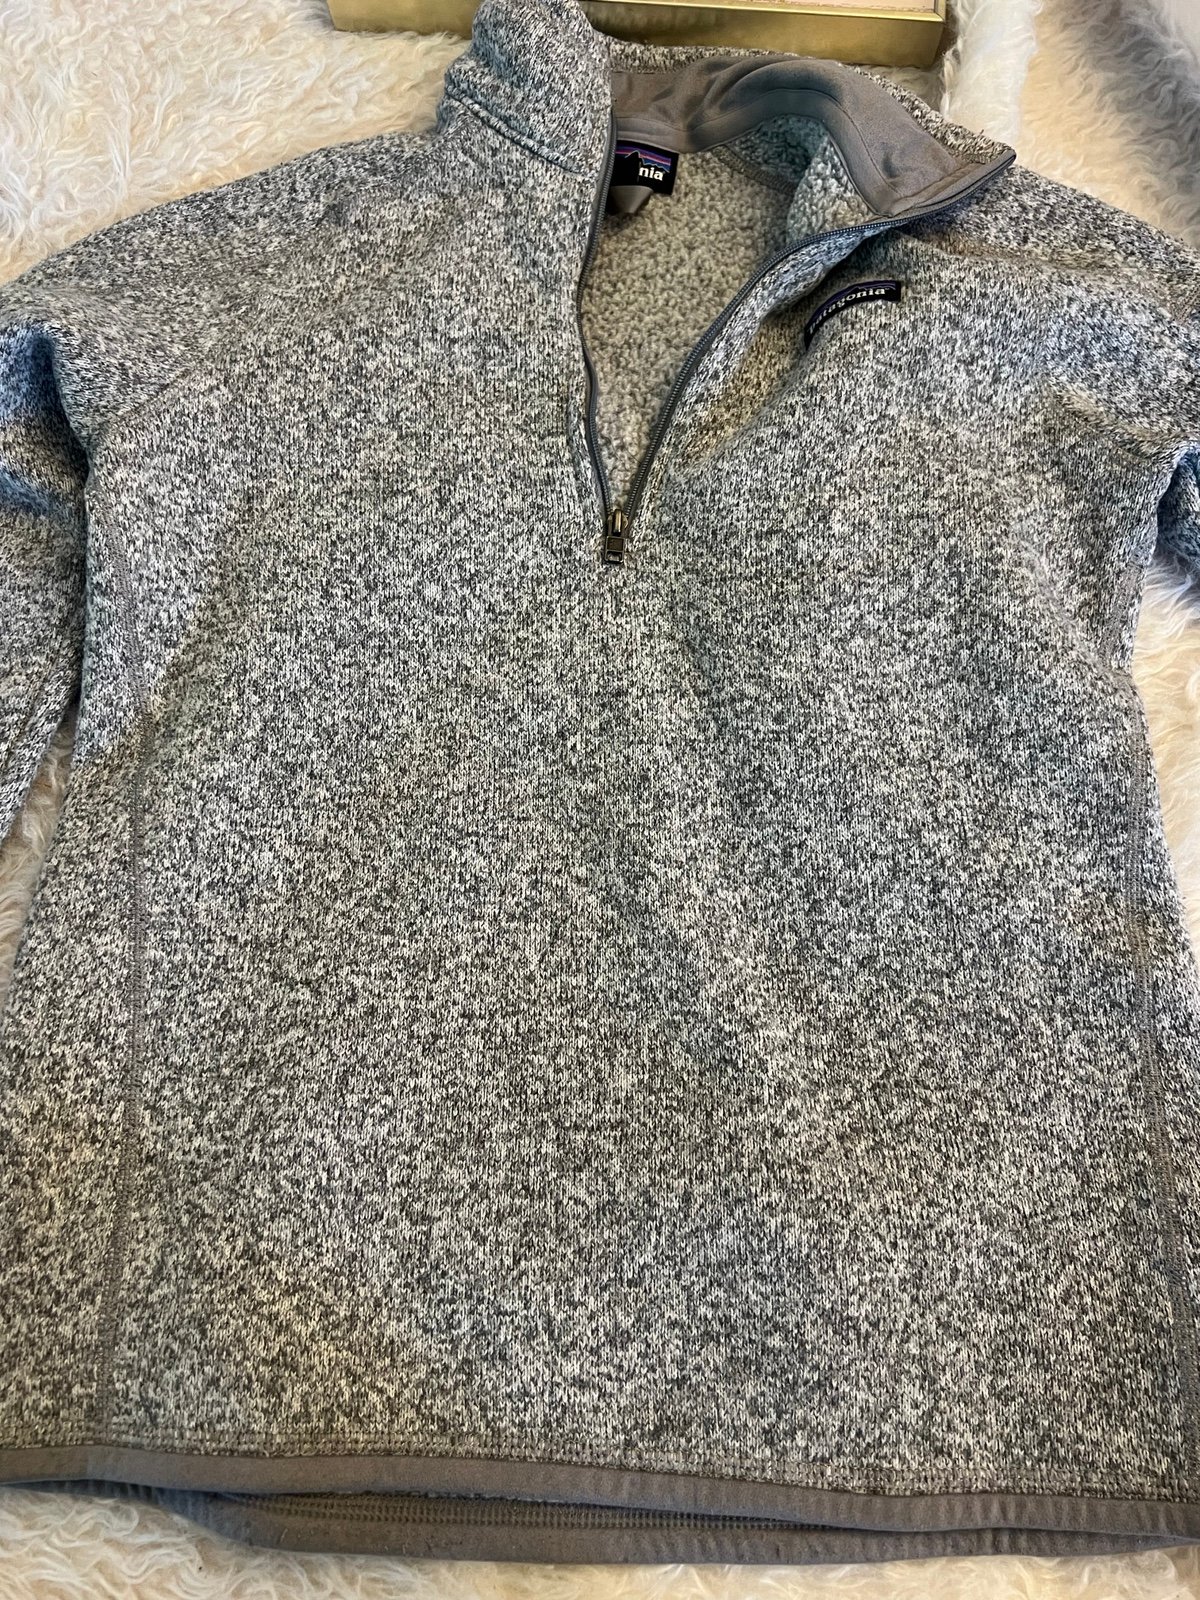 Stylish Patagonia Better sweater  Size M  Flawless cond